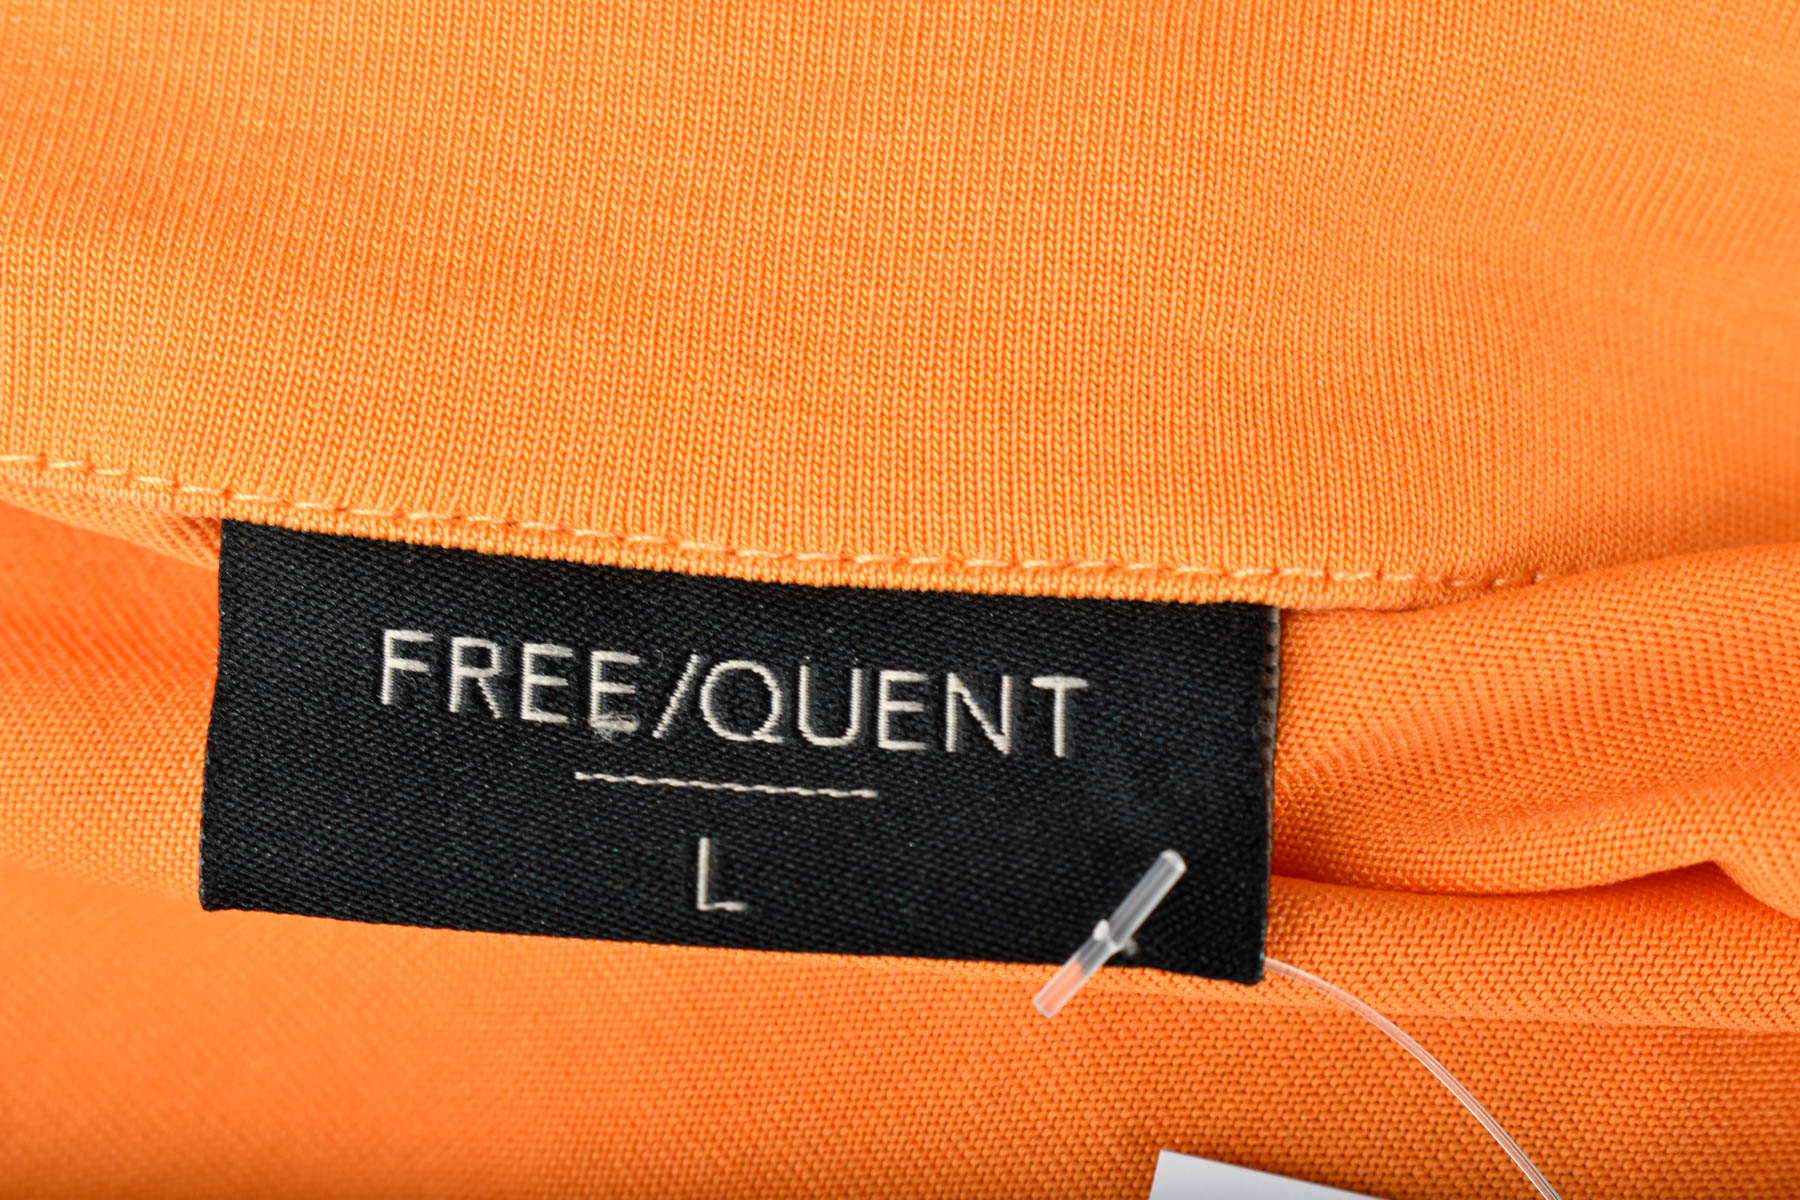 Women's top - FREE QUENT - 2